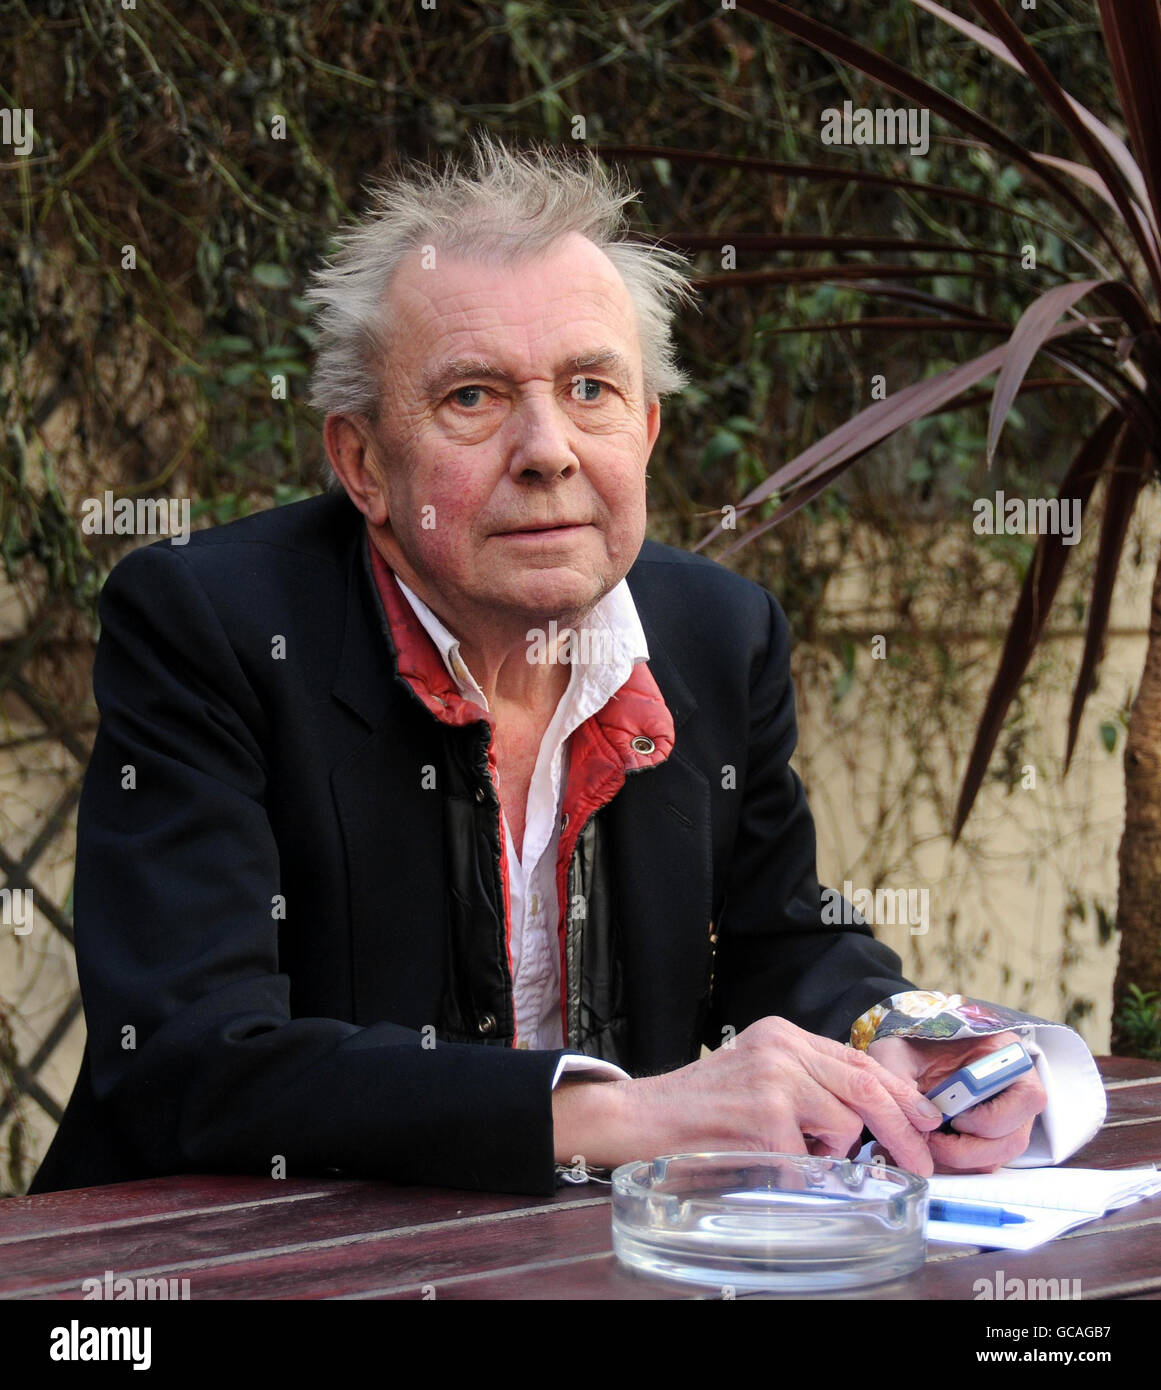 Previously unreleased image, dated Tuesday February 16, 2010, BBC presenter Ray Gosling, in Nottingham. Stock Photo